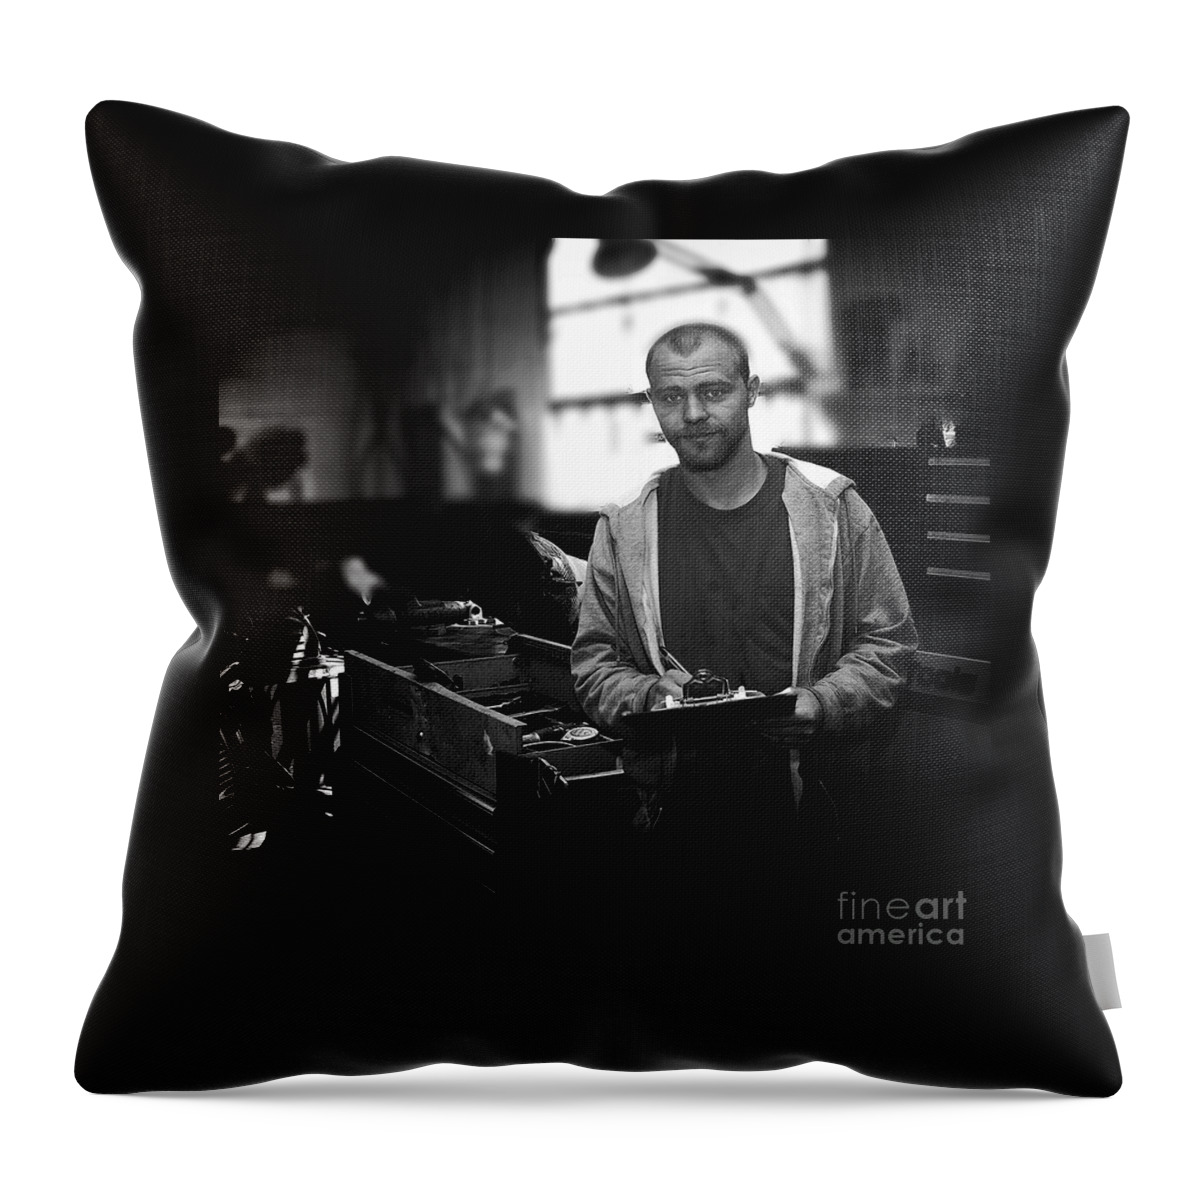 Square-format Throw Pillow featuring the photograph Meticulous Service by Frank J Casella